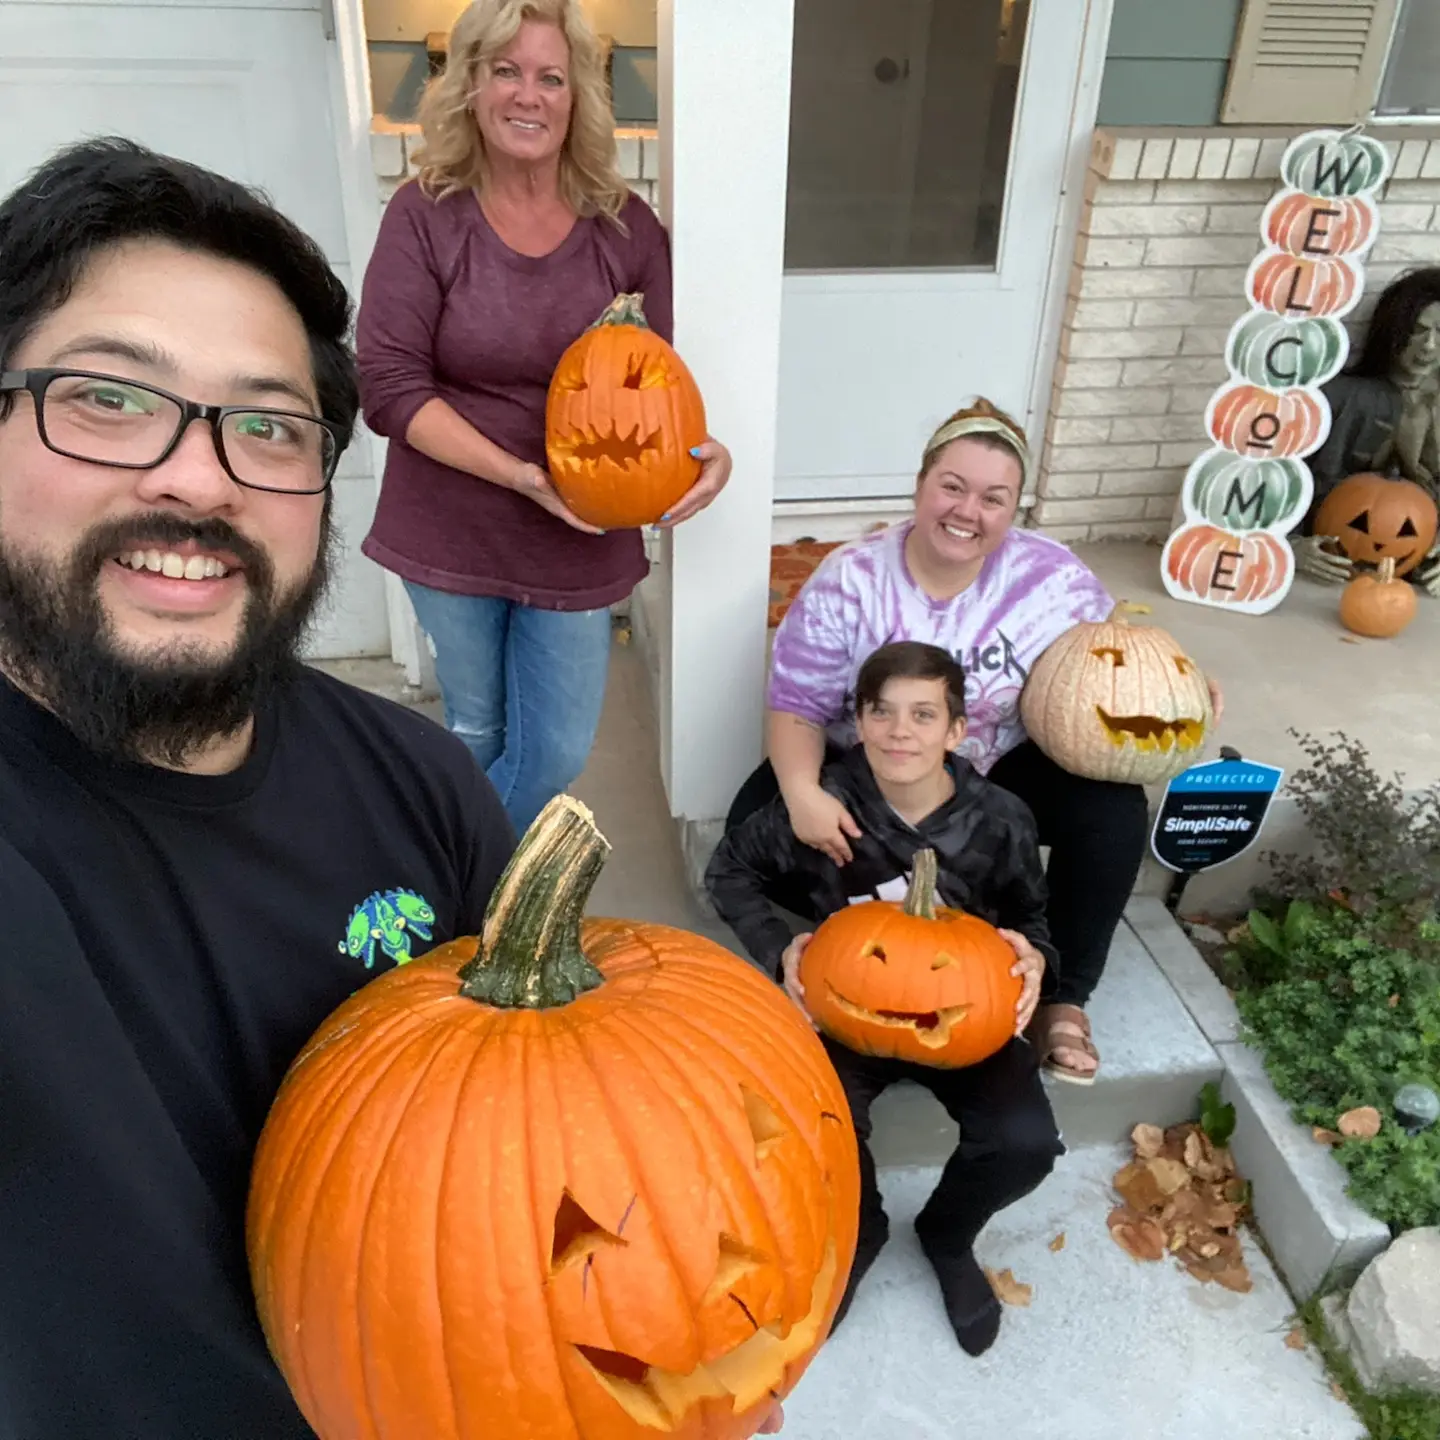 Sitting on the porch with our carved pumpkins